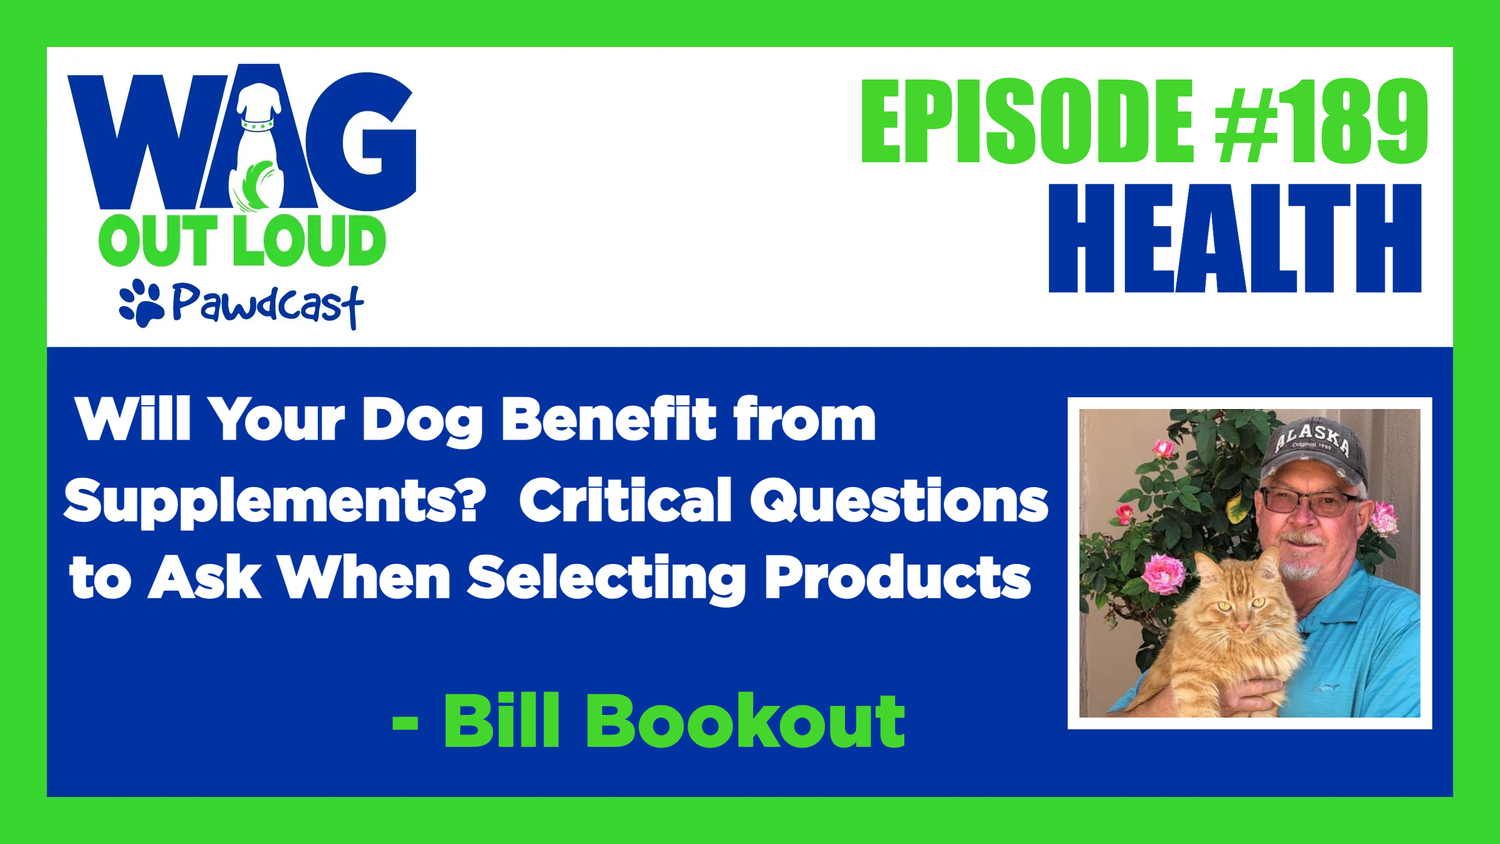 Will Your Dog Benefit from Supplements? Critical Questions to Ask When Selecting Products